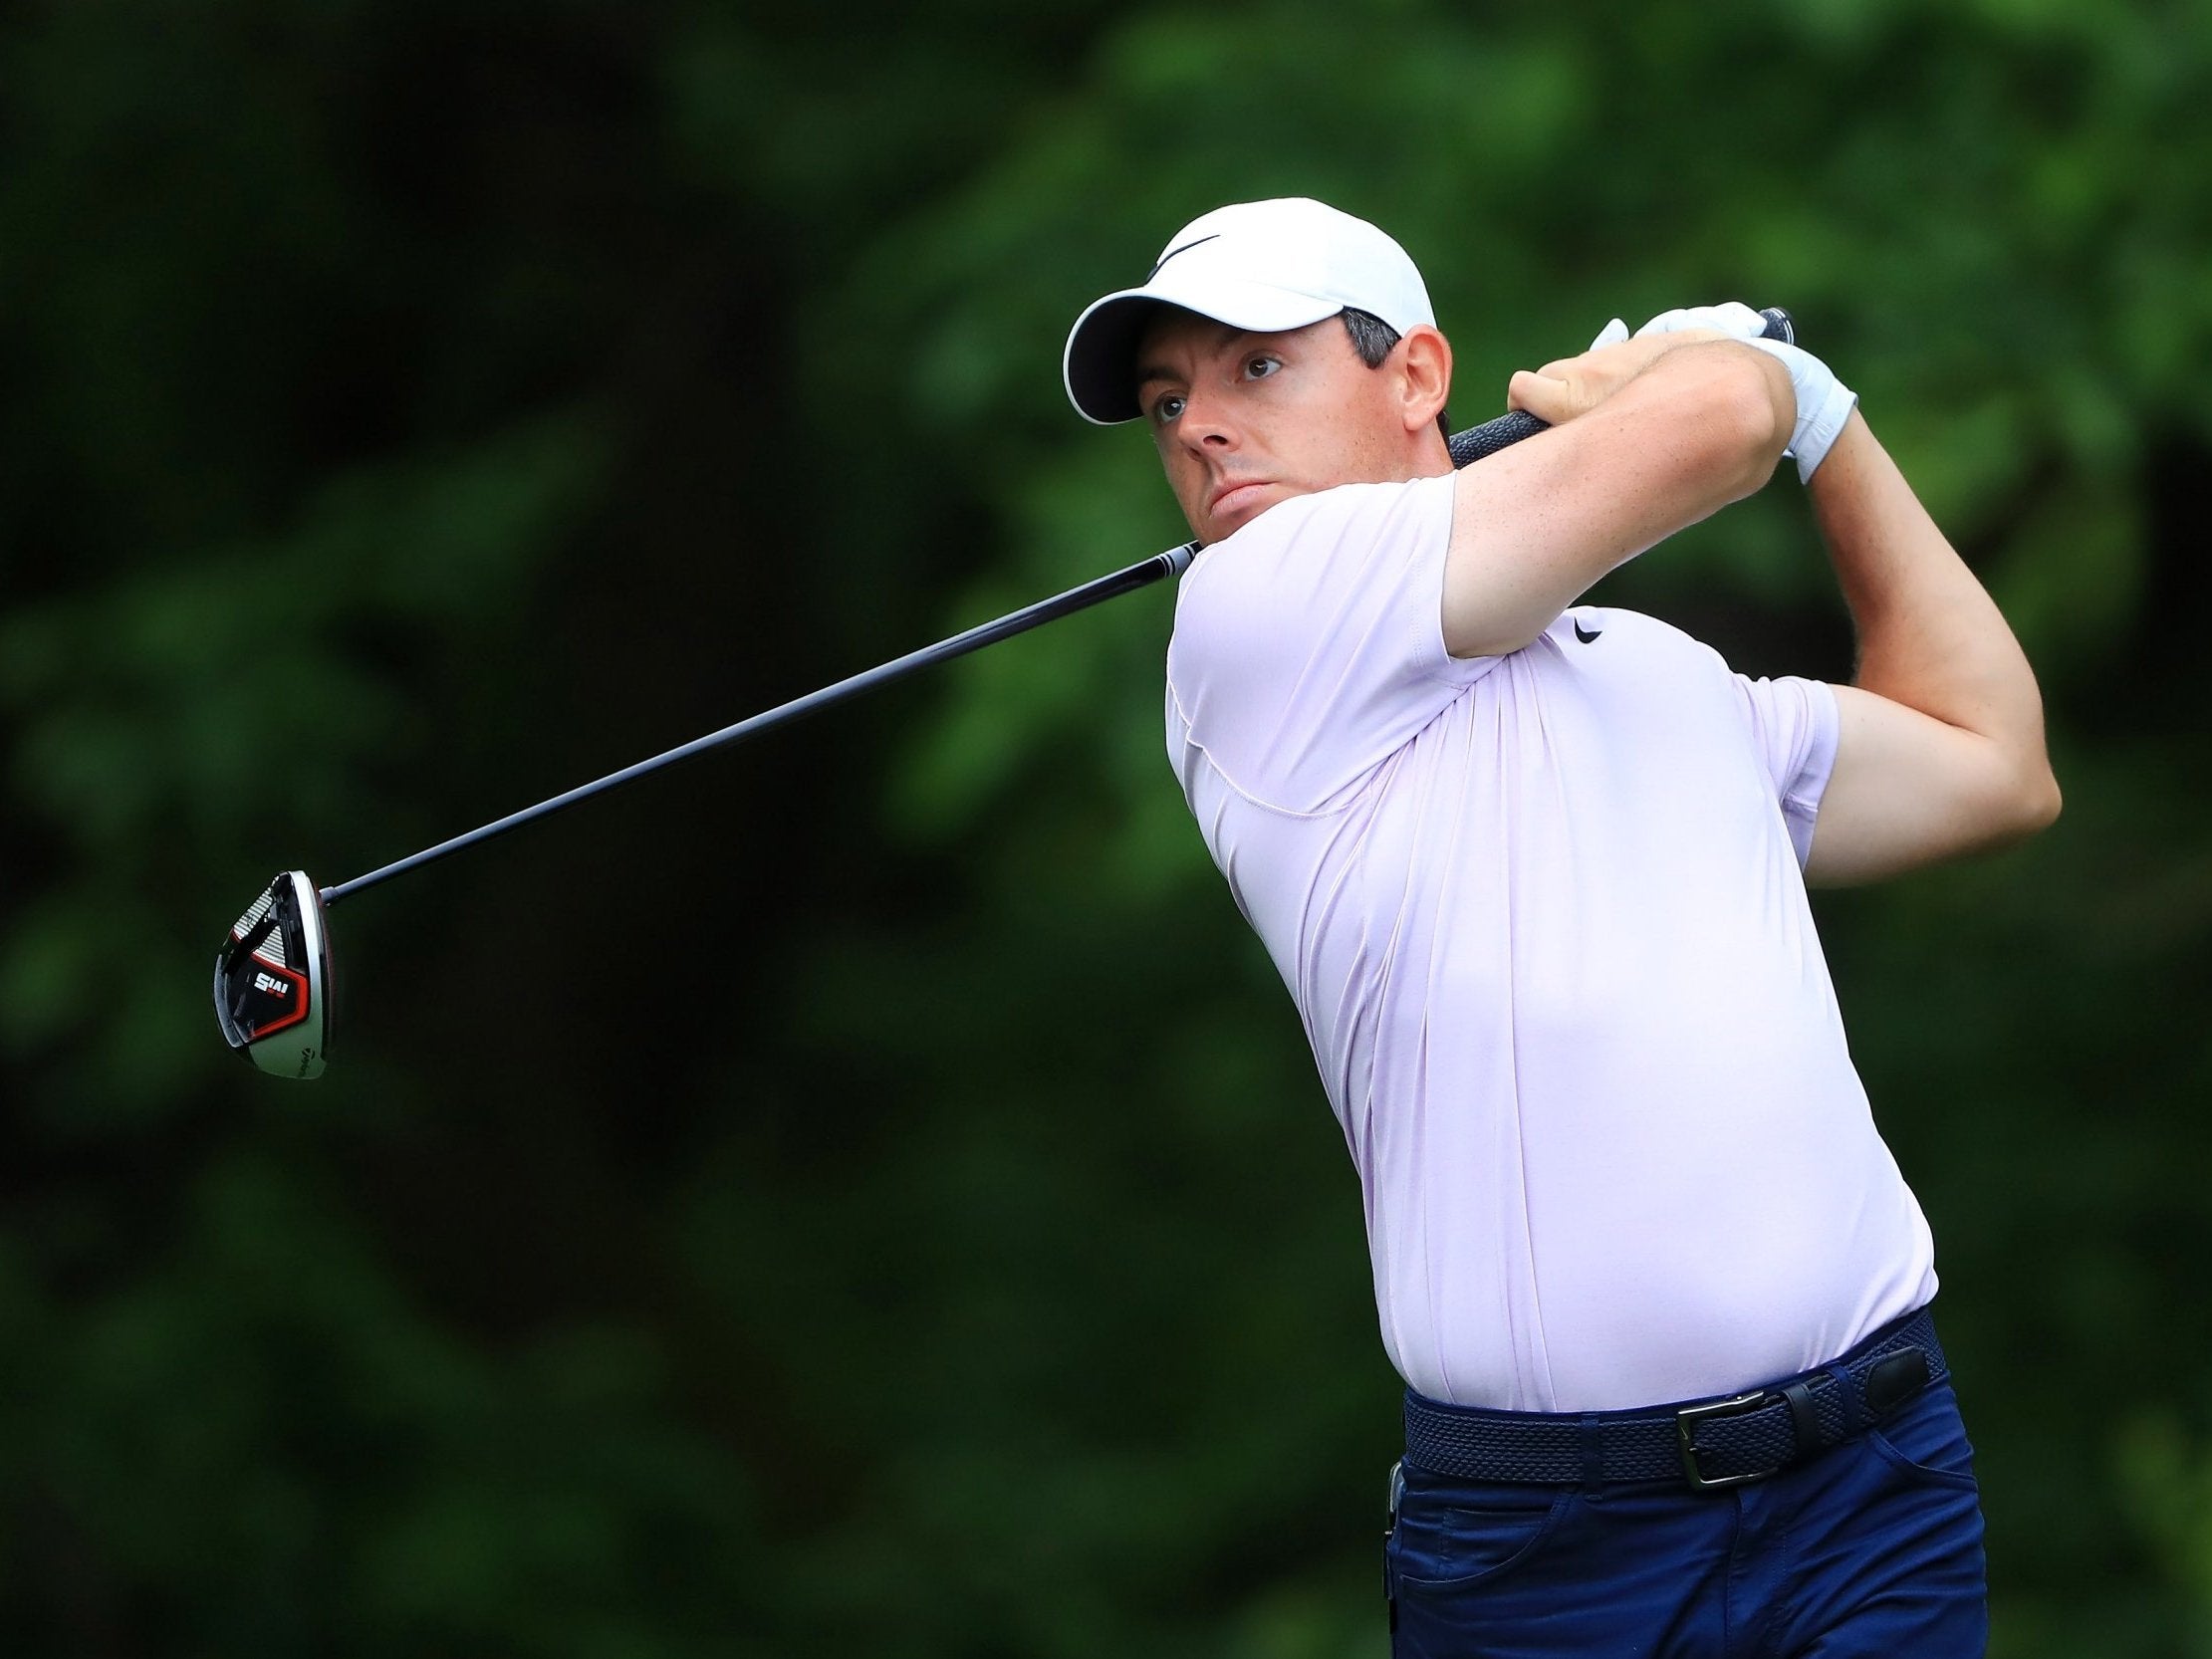 McIlroy believes he's still in with a shout at Quail Hollow